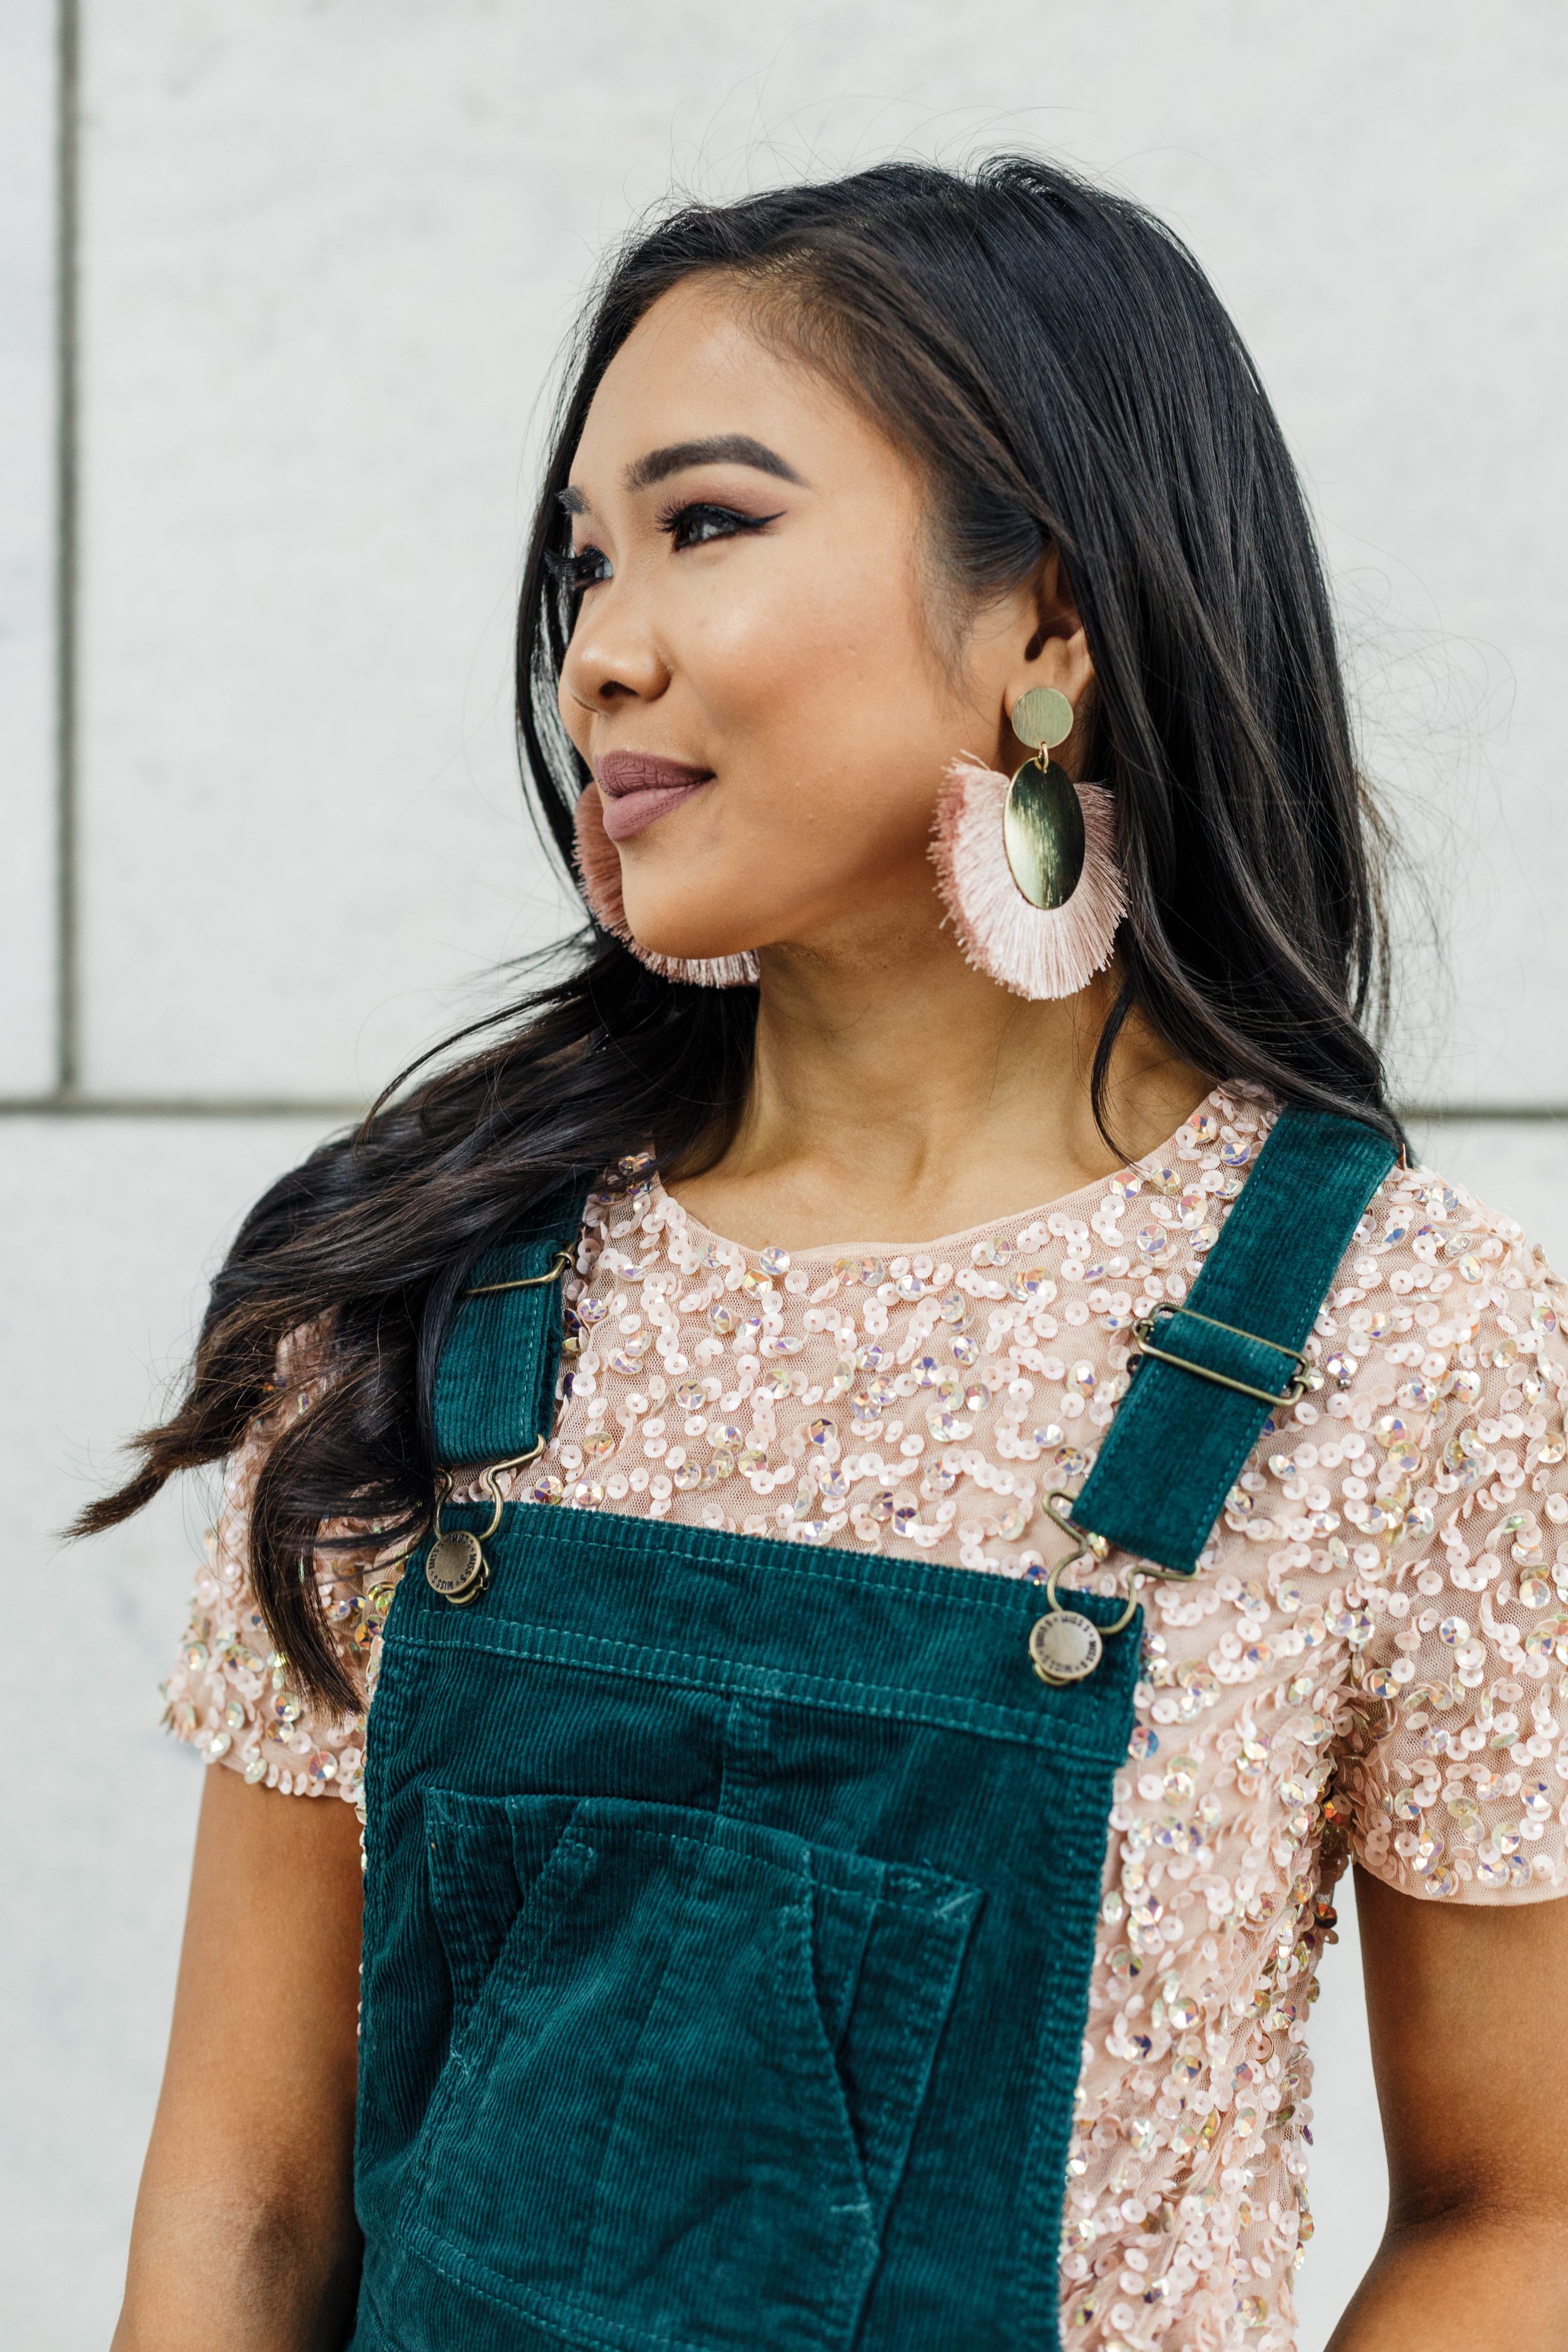 Hoang-Kim wears olive + piper earrings to complete her overall dress look